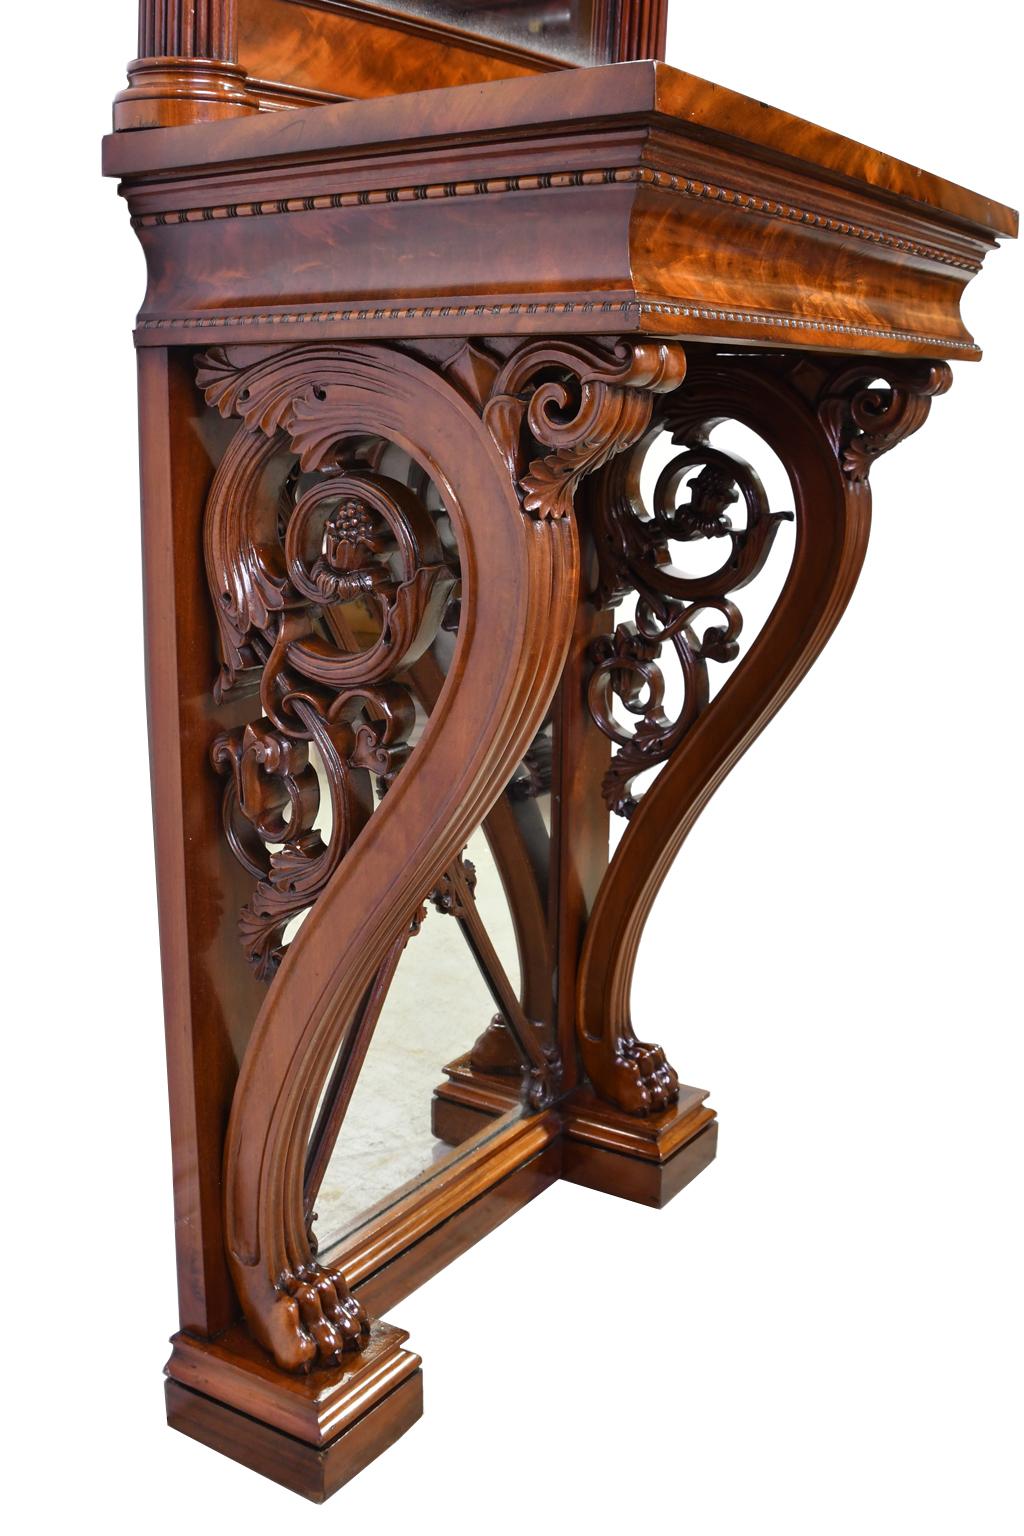 Mid-19th Century Tall Neoclassical-Style Console & Pier Mirror in Mahogany, Denmark, c. 1830